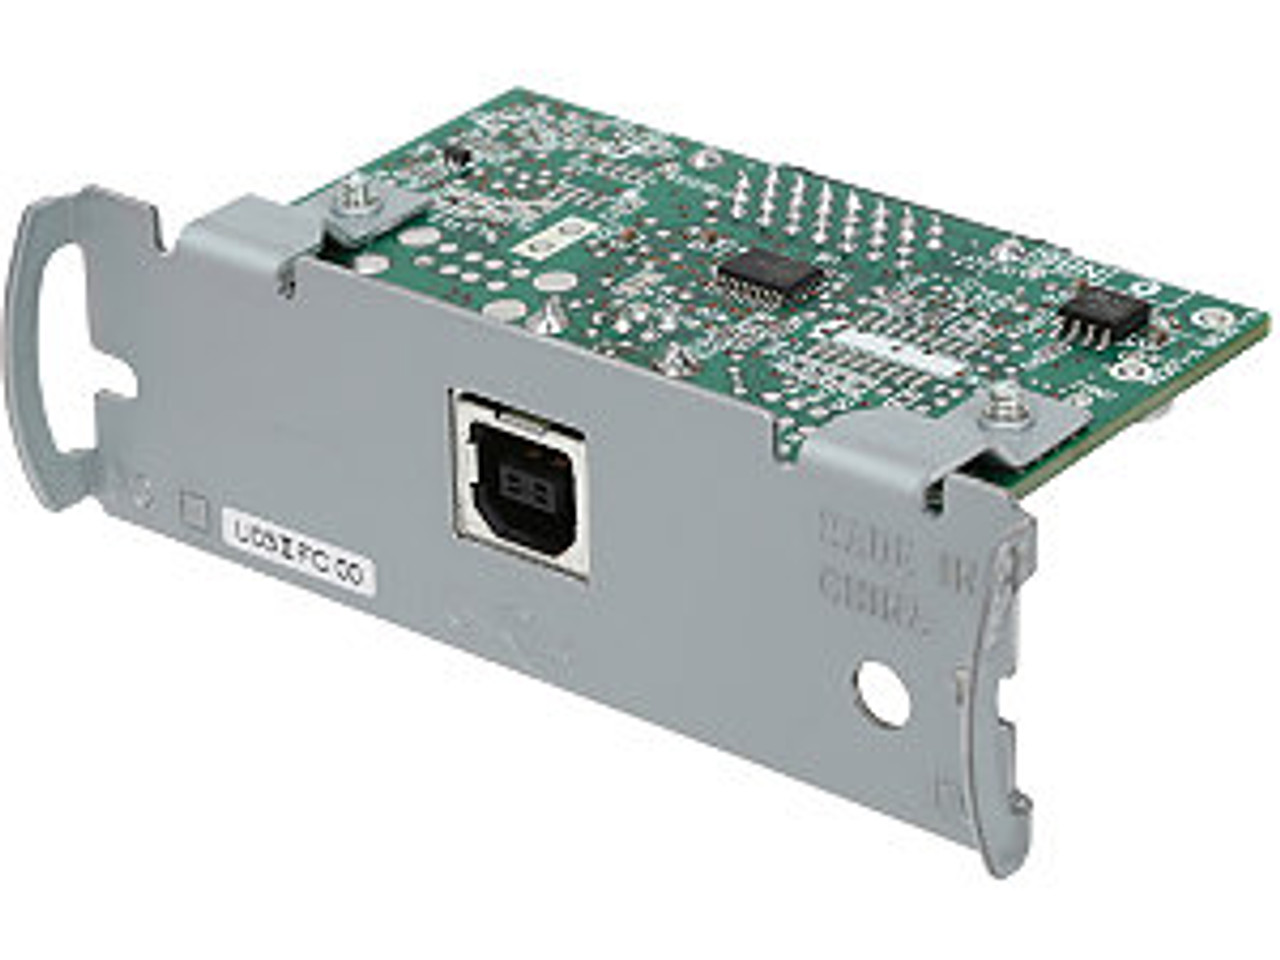 Epson USB 2.0 Replacement Interface Card